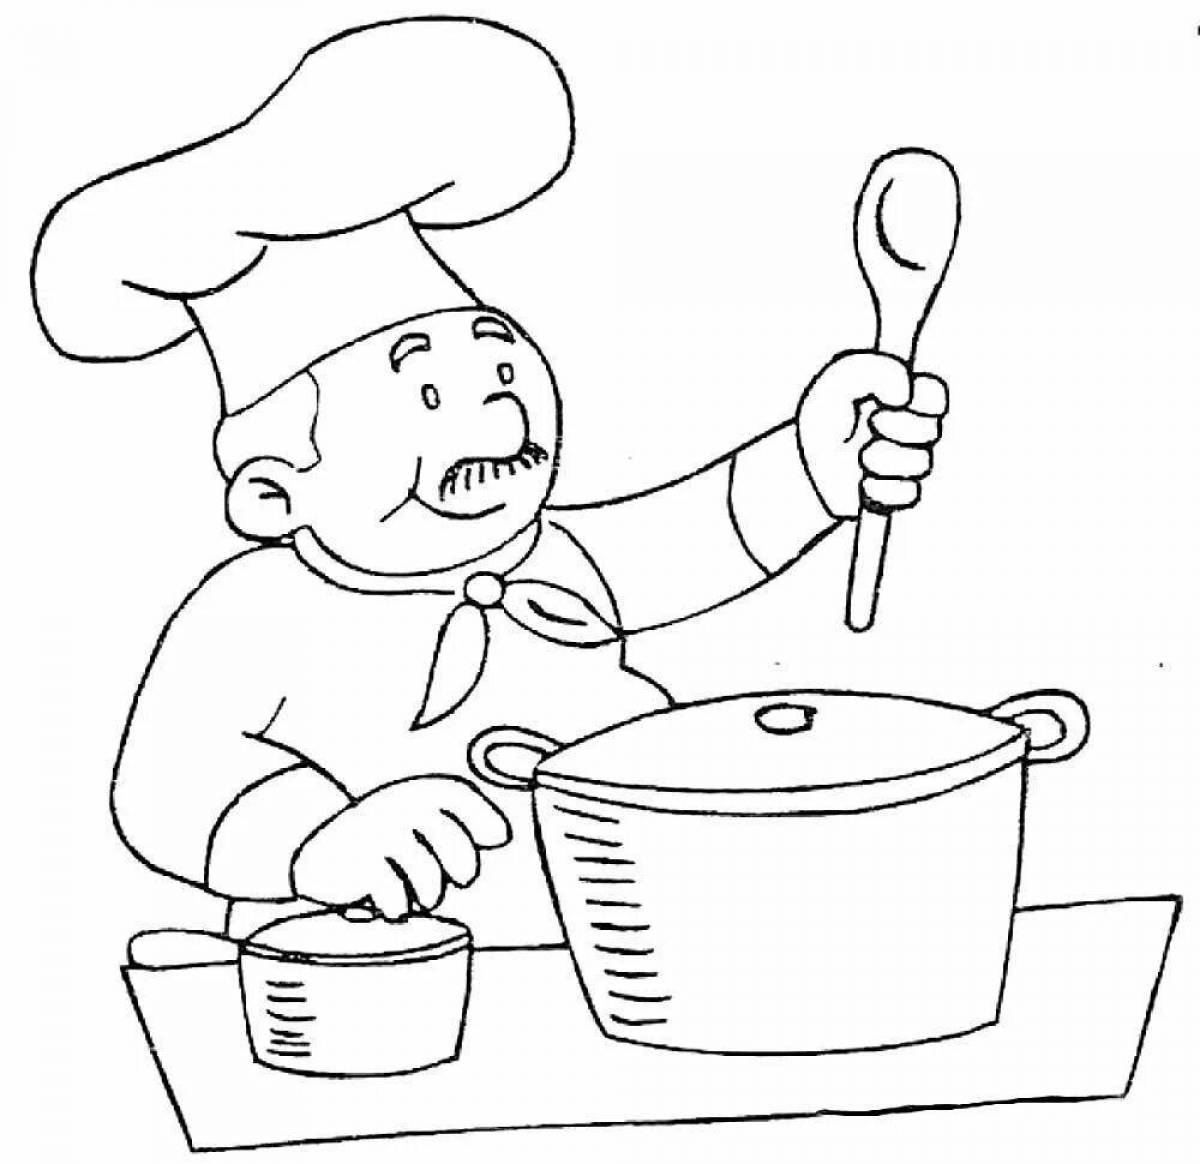 Coloring book funny cooks for kindergarten